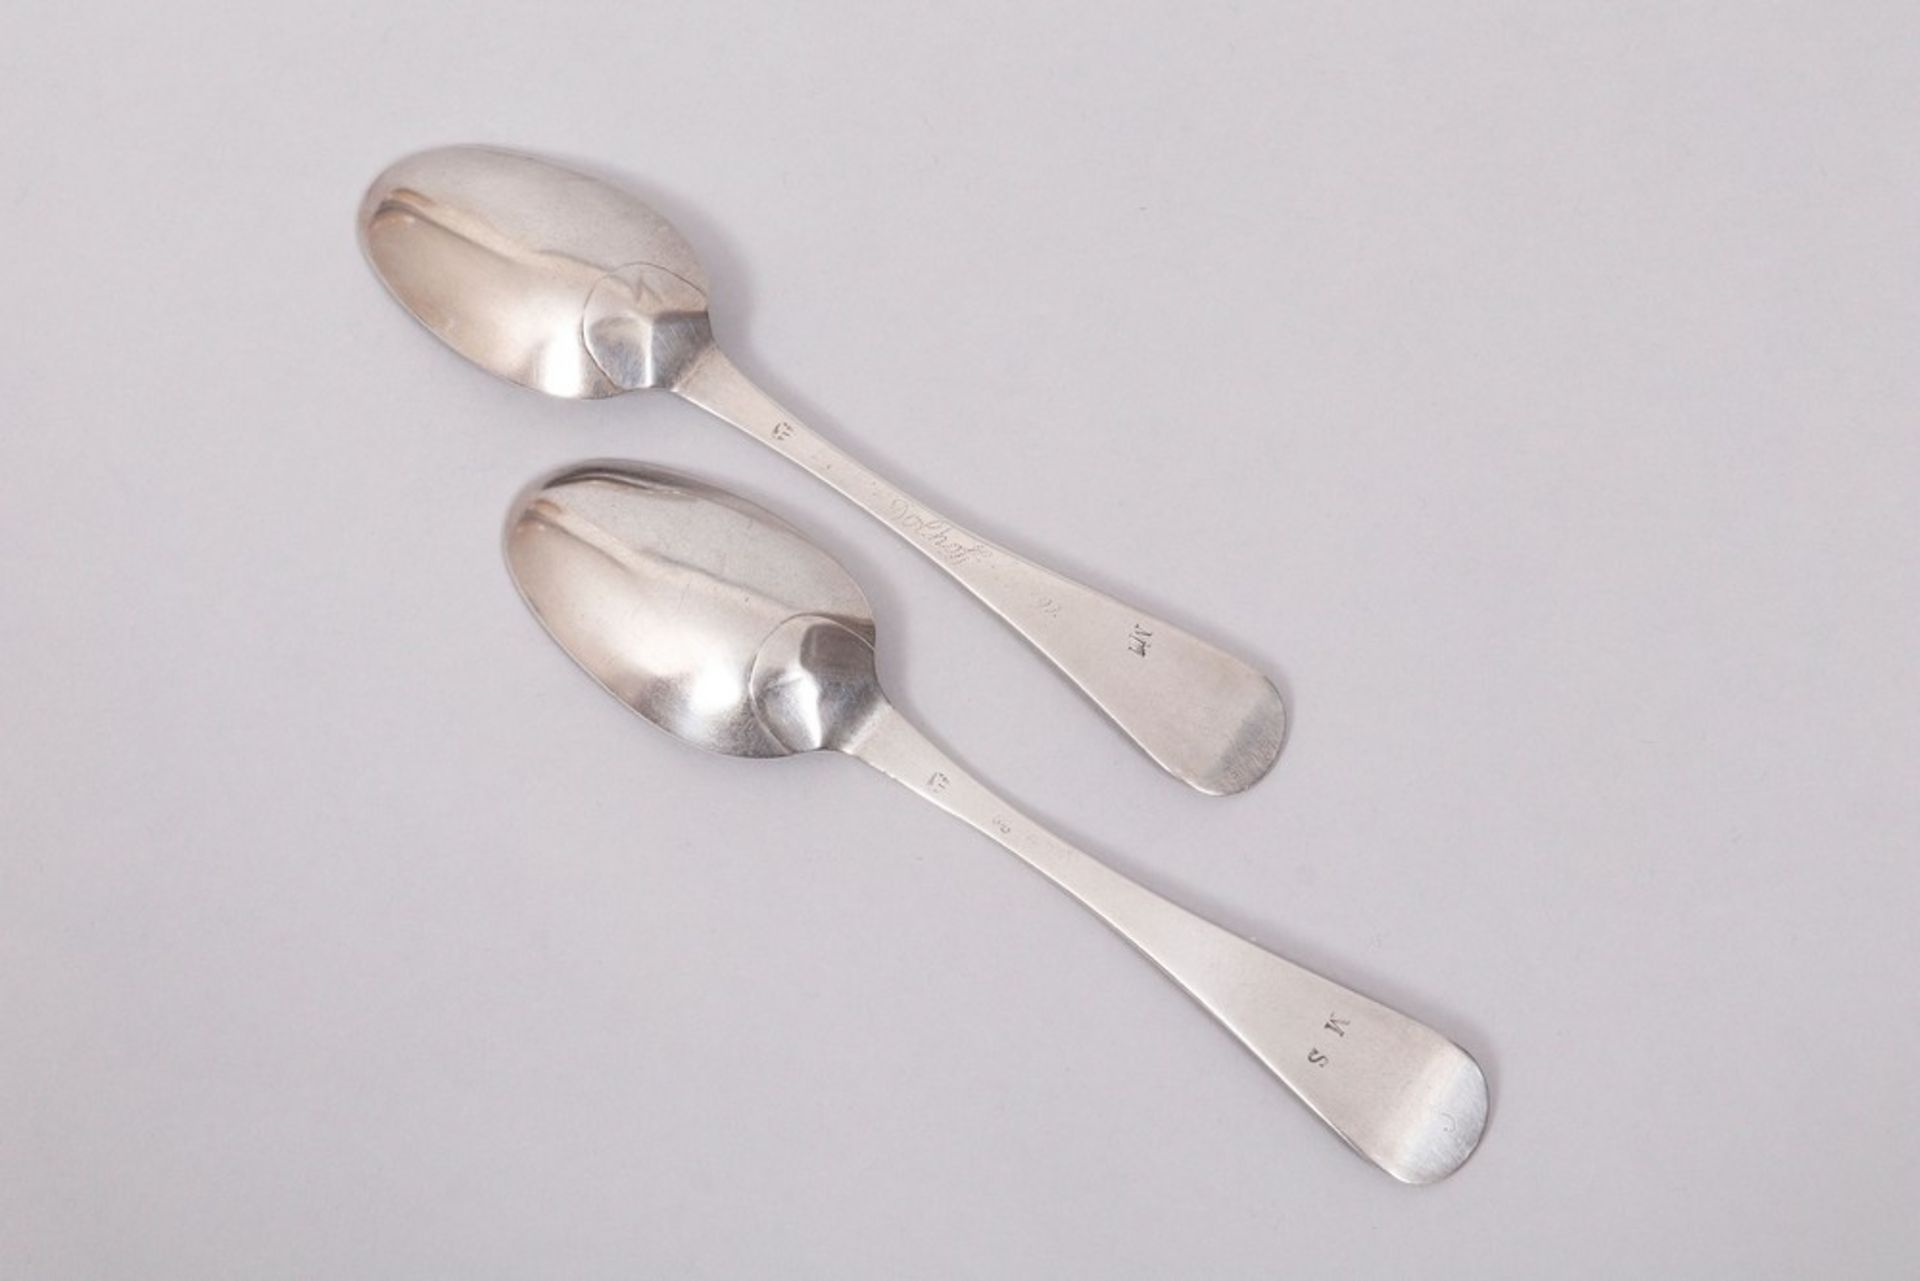 Pair of dining spoons, silver, Wismar, late 18th century/1800 - Image 2 of 4